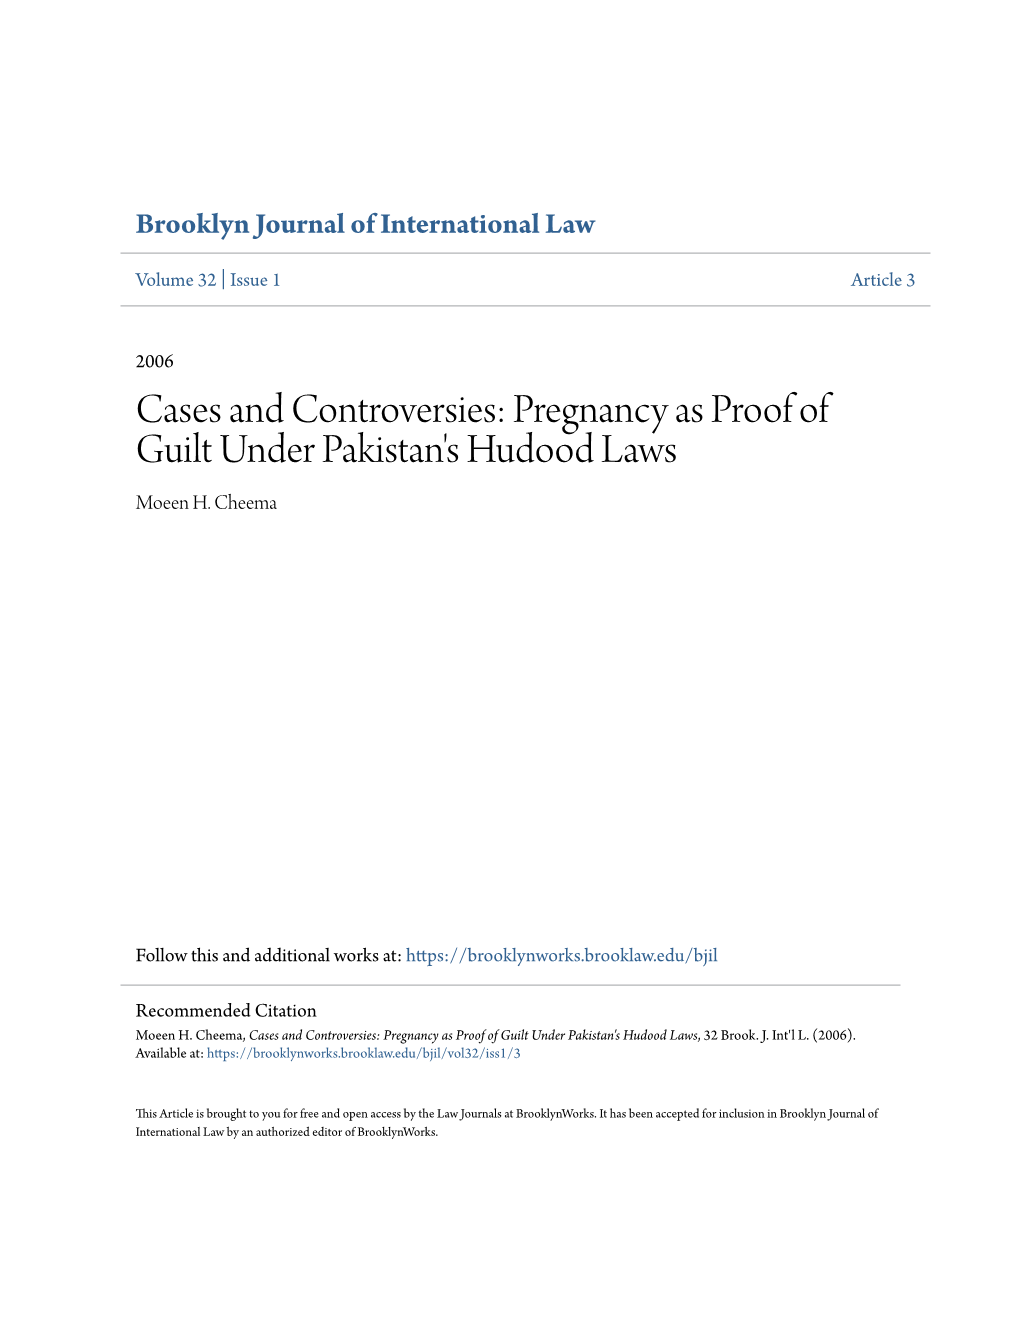 Cases and Controversies: Pregnancy As Proof of Guilt Under Pakistan's Hudood Laws Moeen H